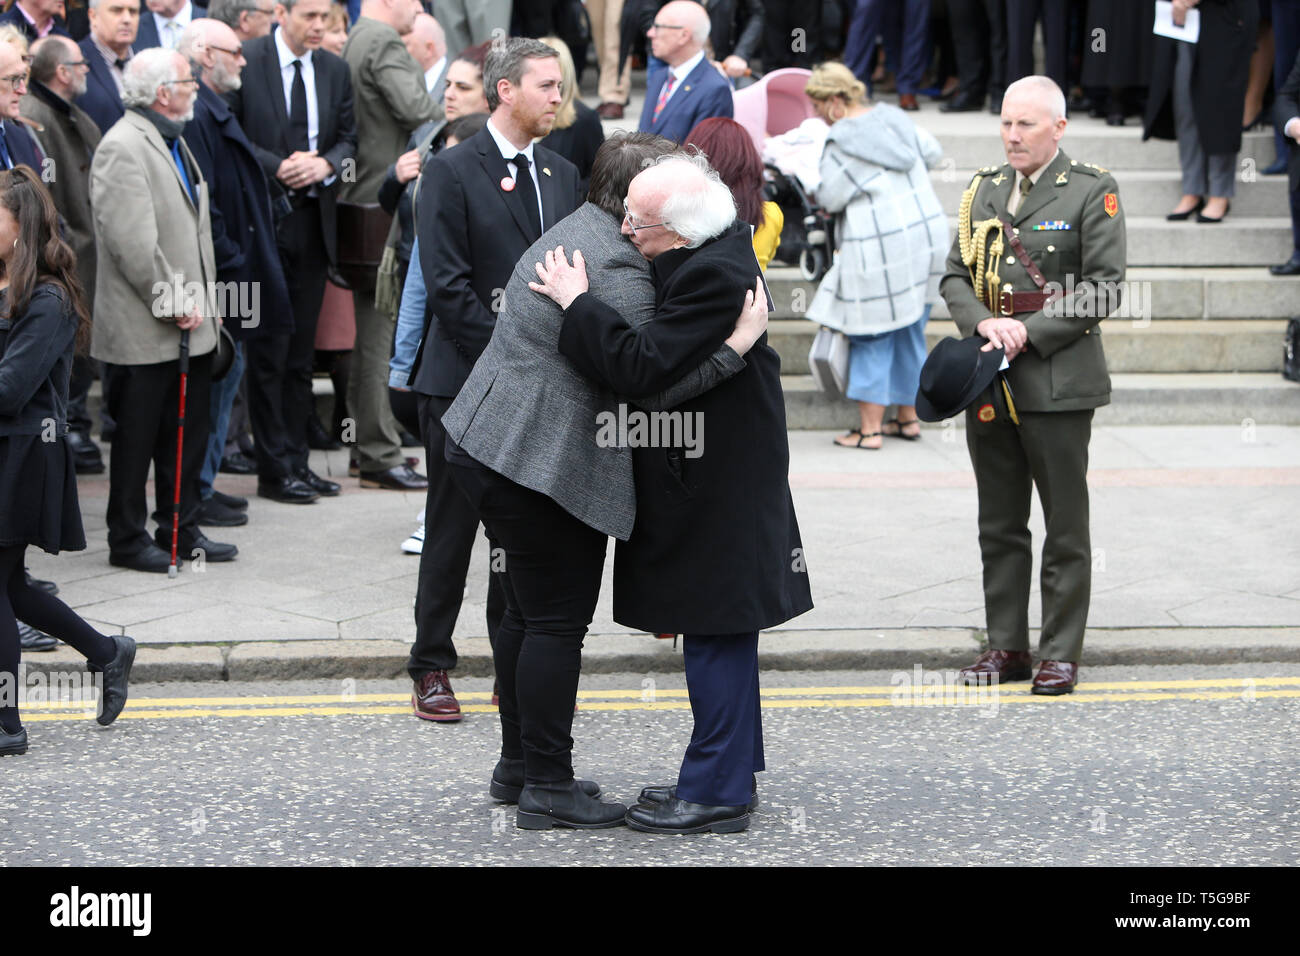 Belfast, County Antrim, Northern Ireland, 24th April, 2019 - Irish President Michael D. Higgins hugs Sara Canning, partner of Ms Lyra McKee, after Ms McKee's funeral at St Anne's Cathedral, Donegall Street, Belfast. Ms McKee,a Journalists, 29, was shot in the head on Thursday night while observing rioting in Londonderry's Creggan estate. The New IRA has admitted responsibility for the murder of journalist Lyra McKee. Paul McErlane/Alamy Live News Stock Photo